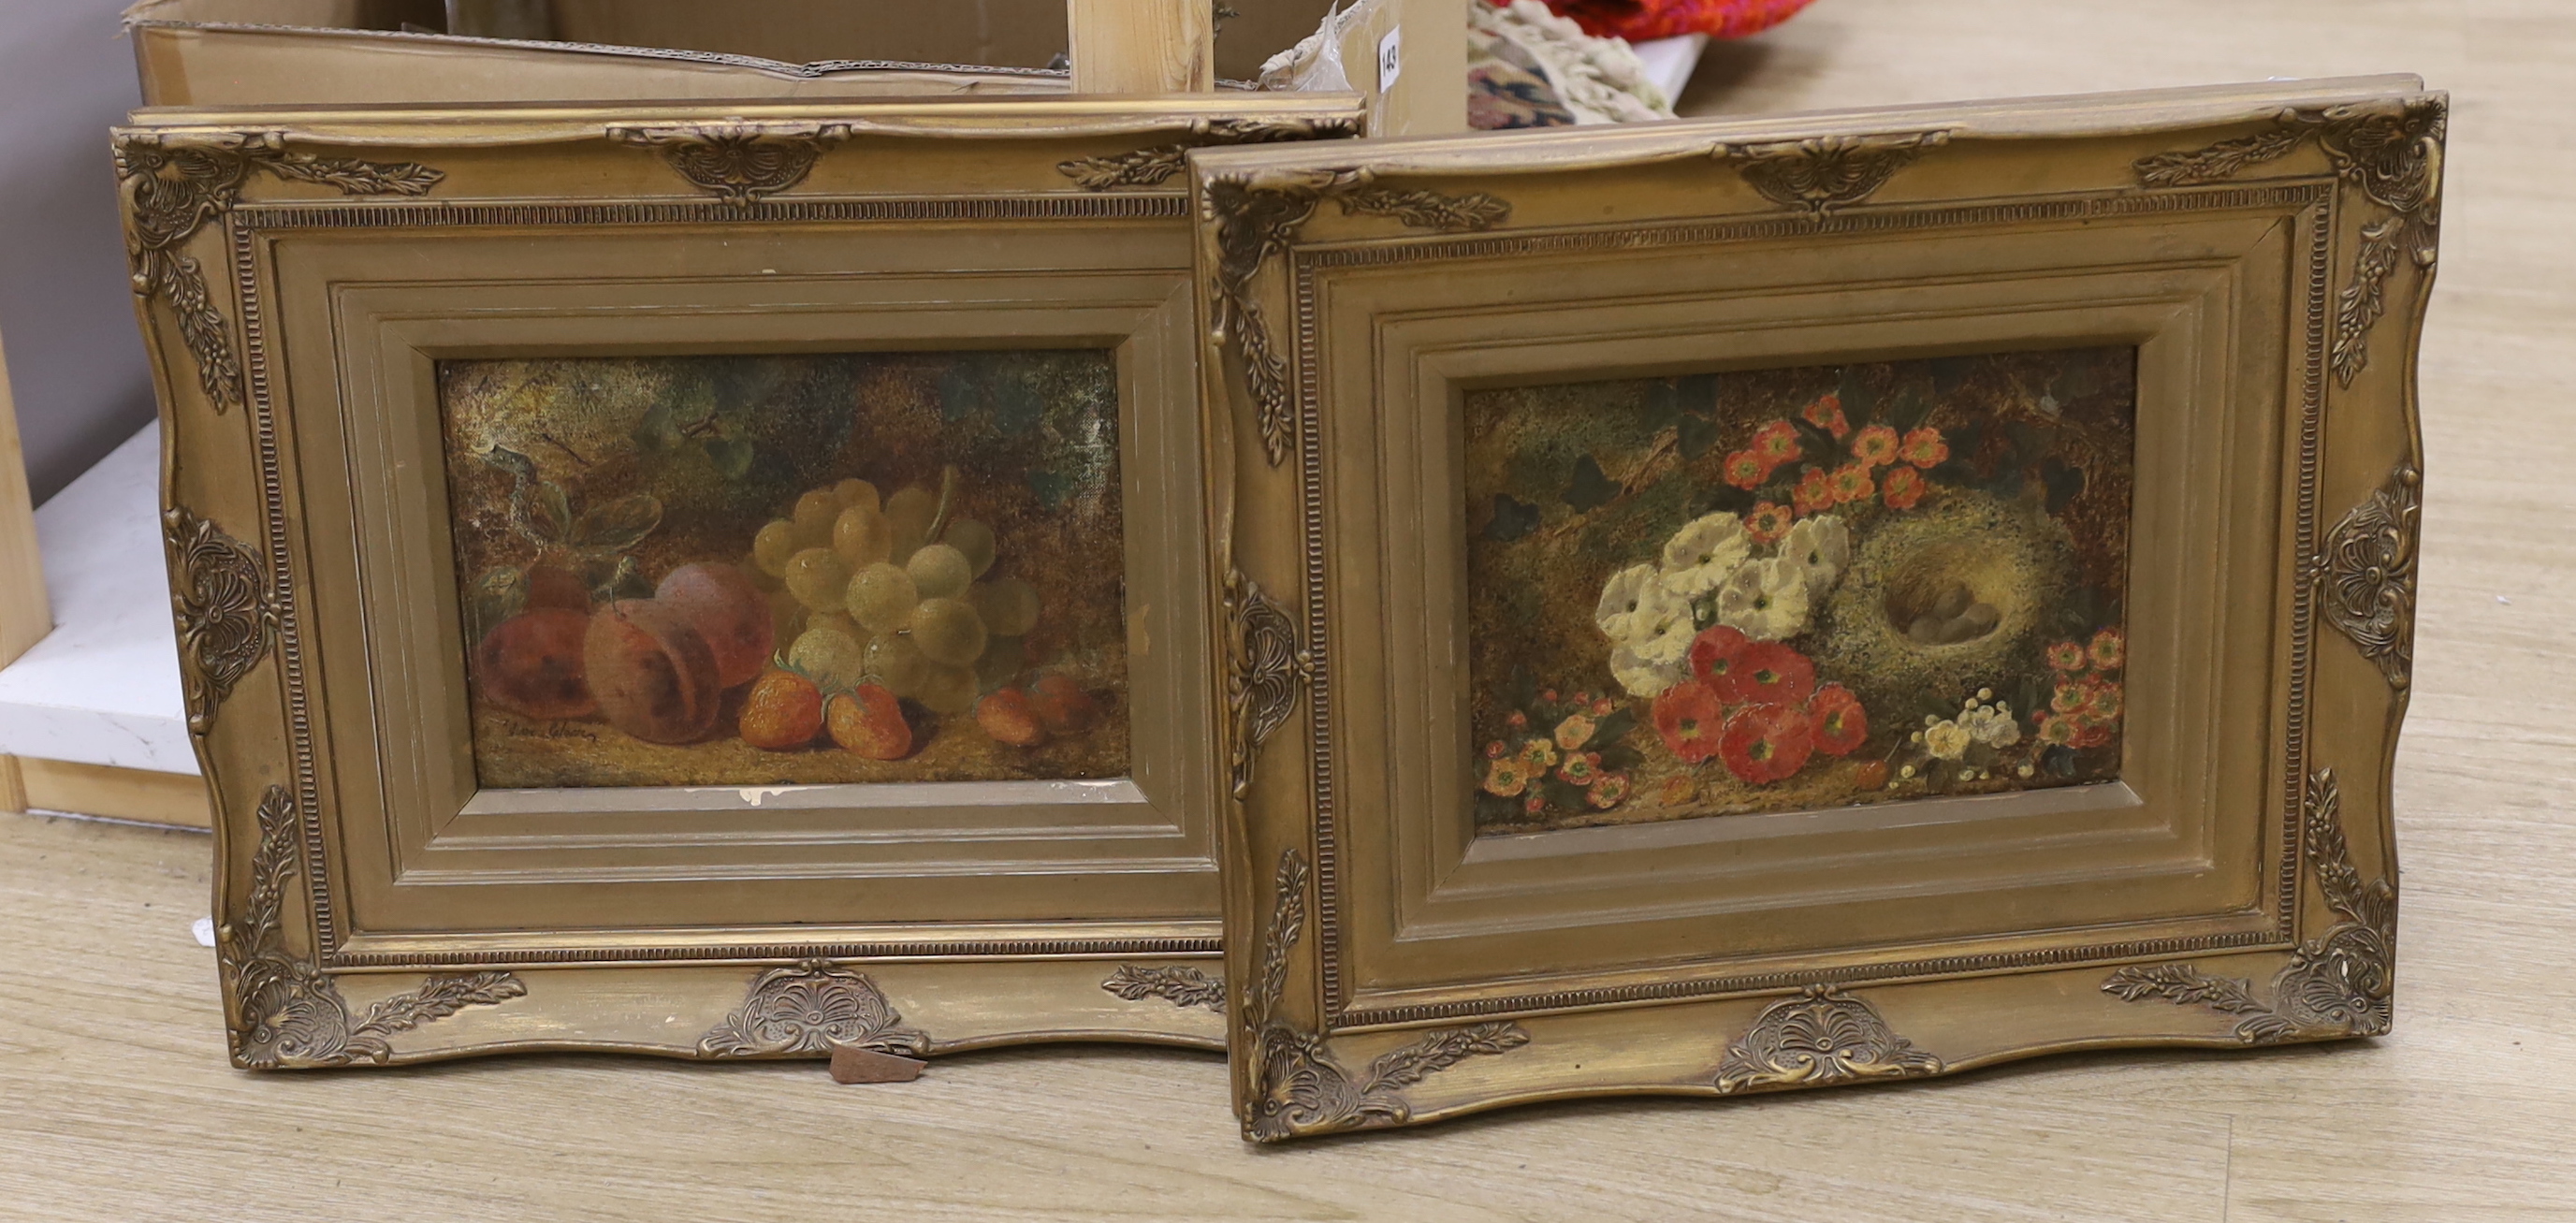 Oliver Clare (1853-1927), pair of oils on canvas, Still lifes of fruit and flowers, each signed, 17 x 24cm, ornate gilt framed